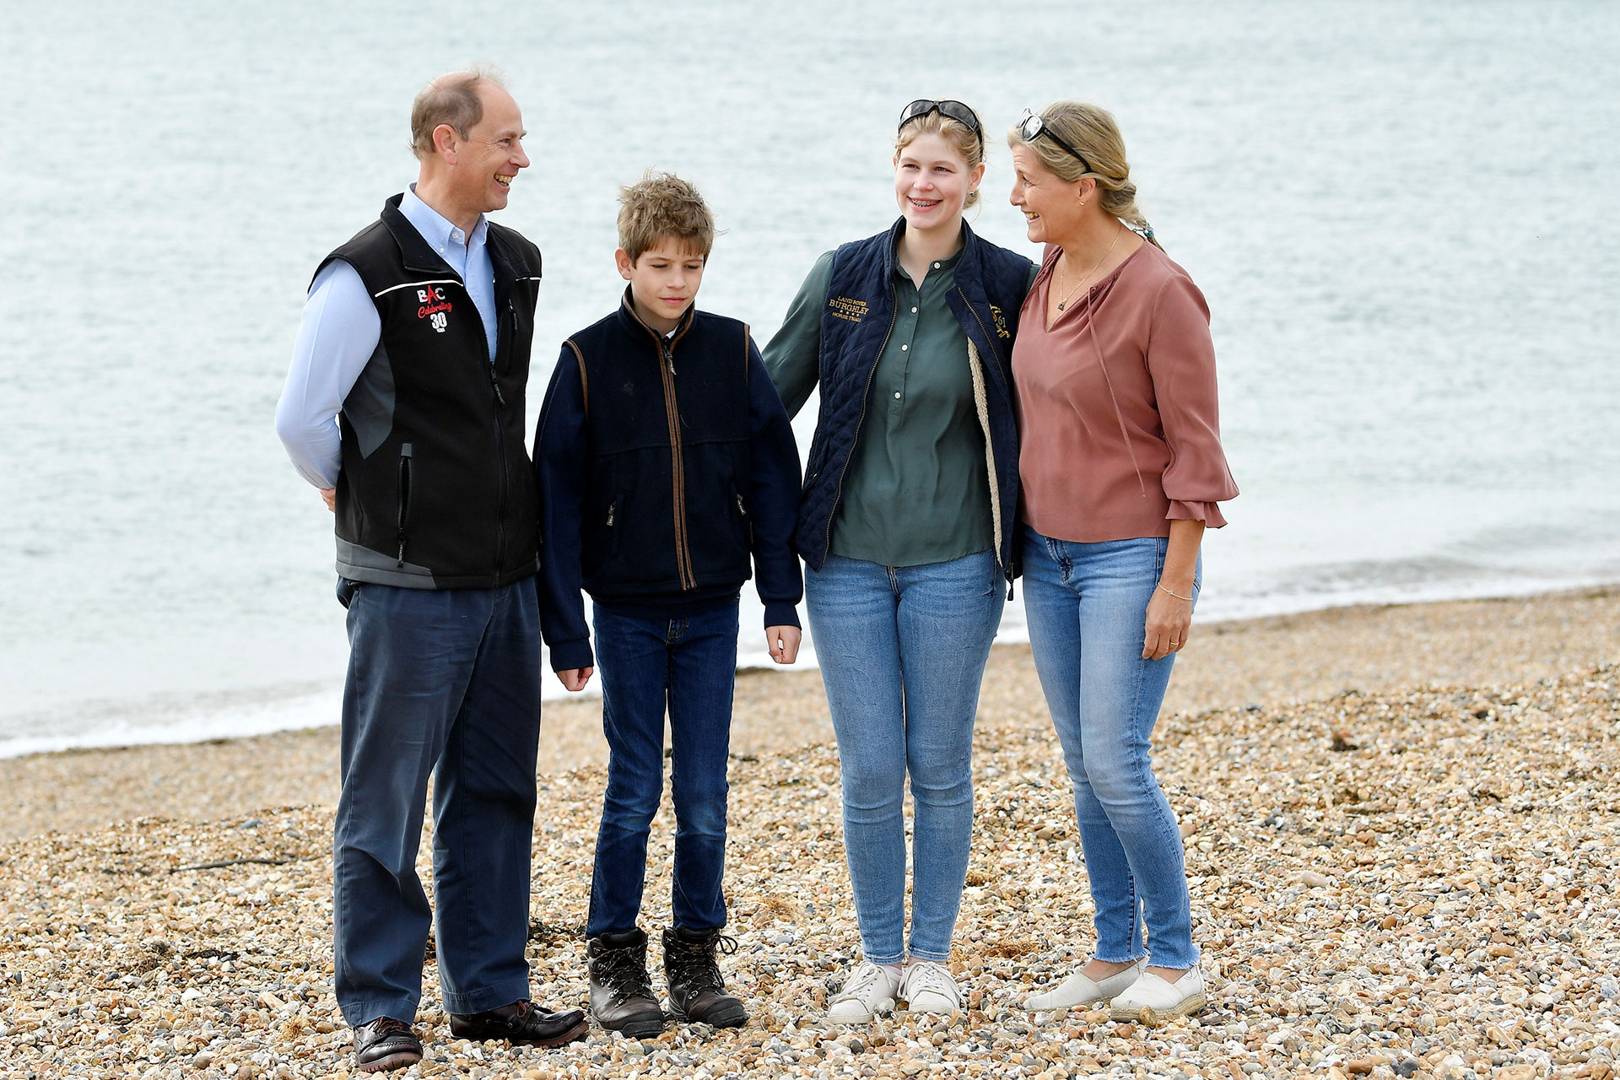 Prince Edward, Countess of Wessex, Lady Louise Windsor, James, Viscount